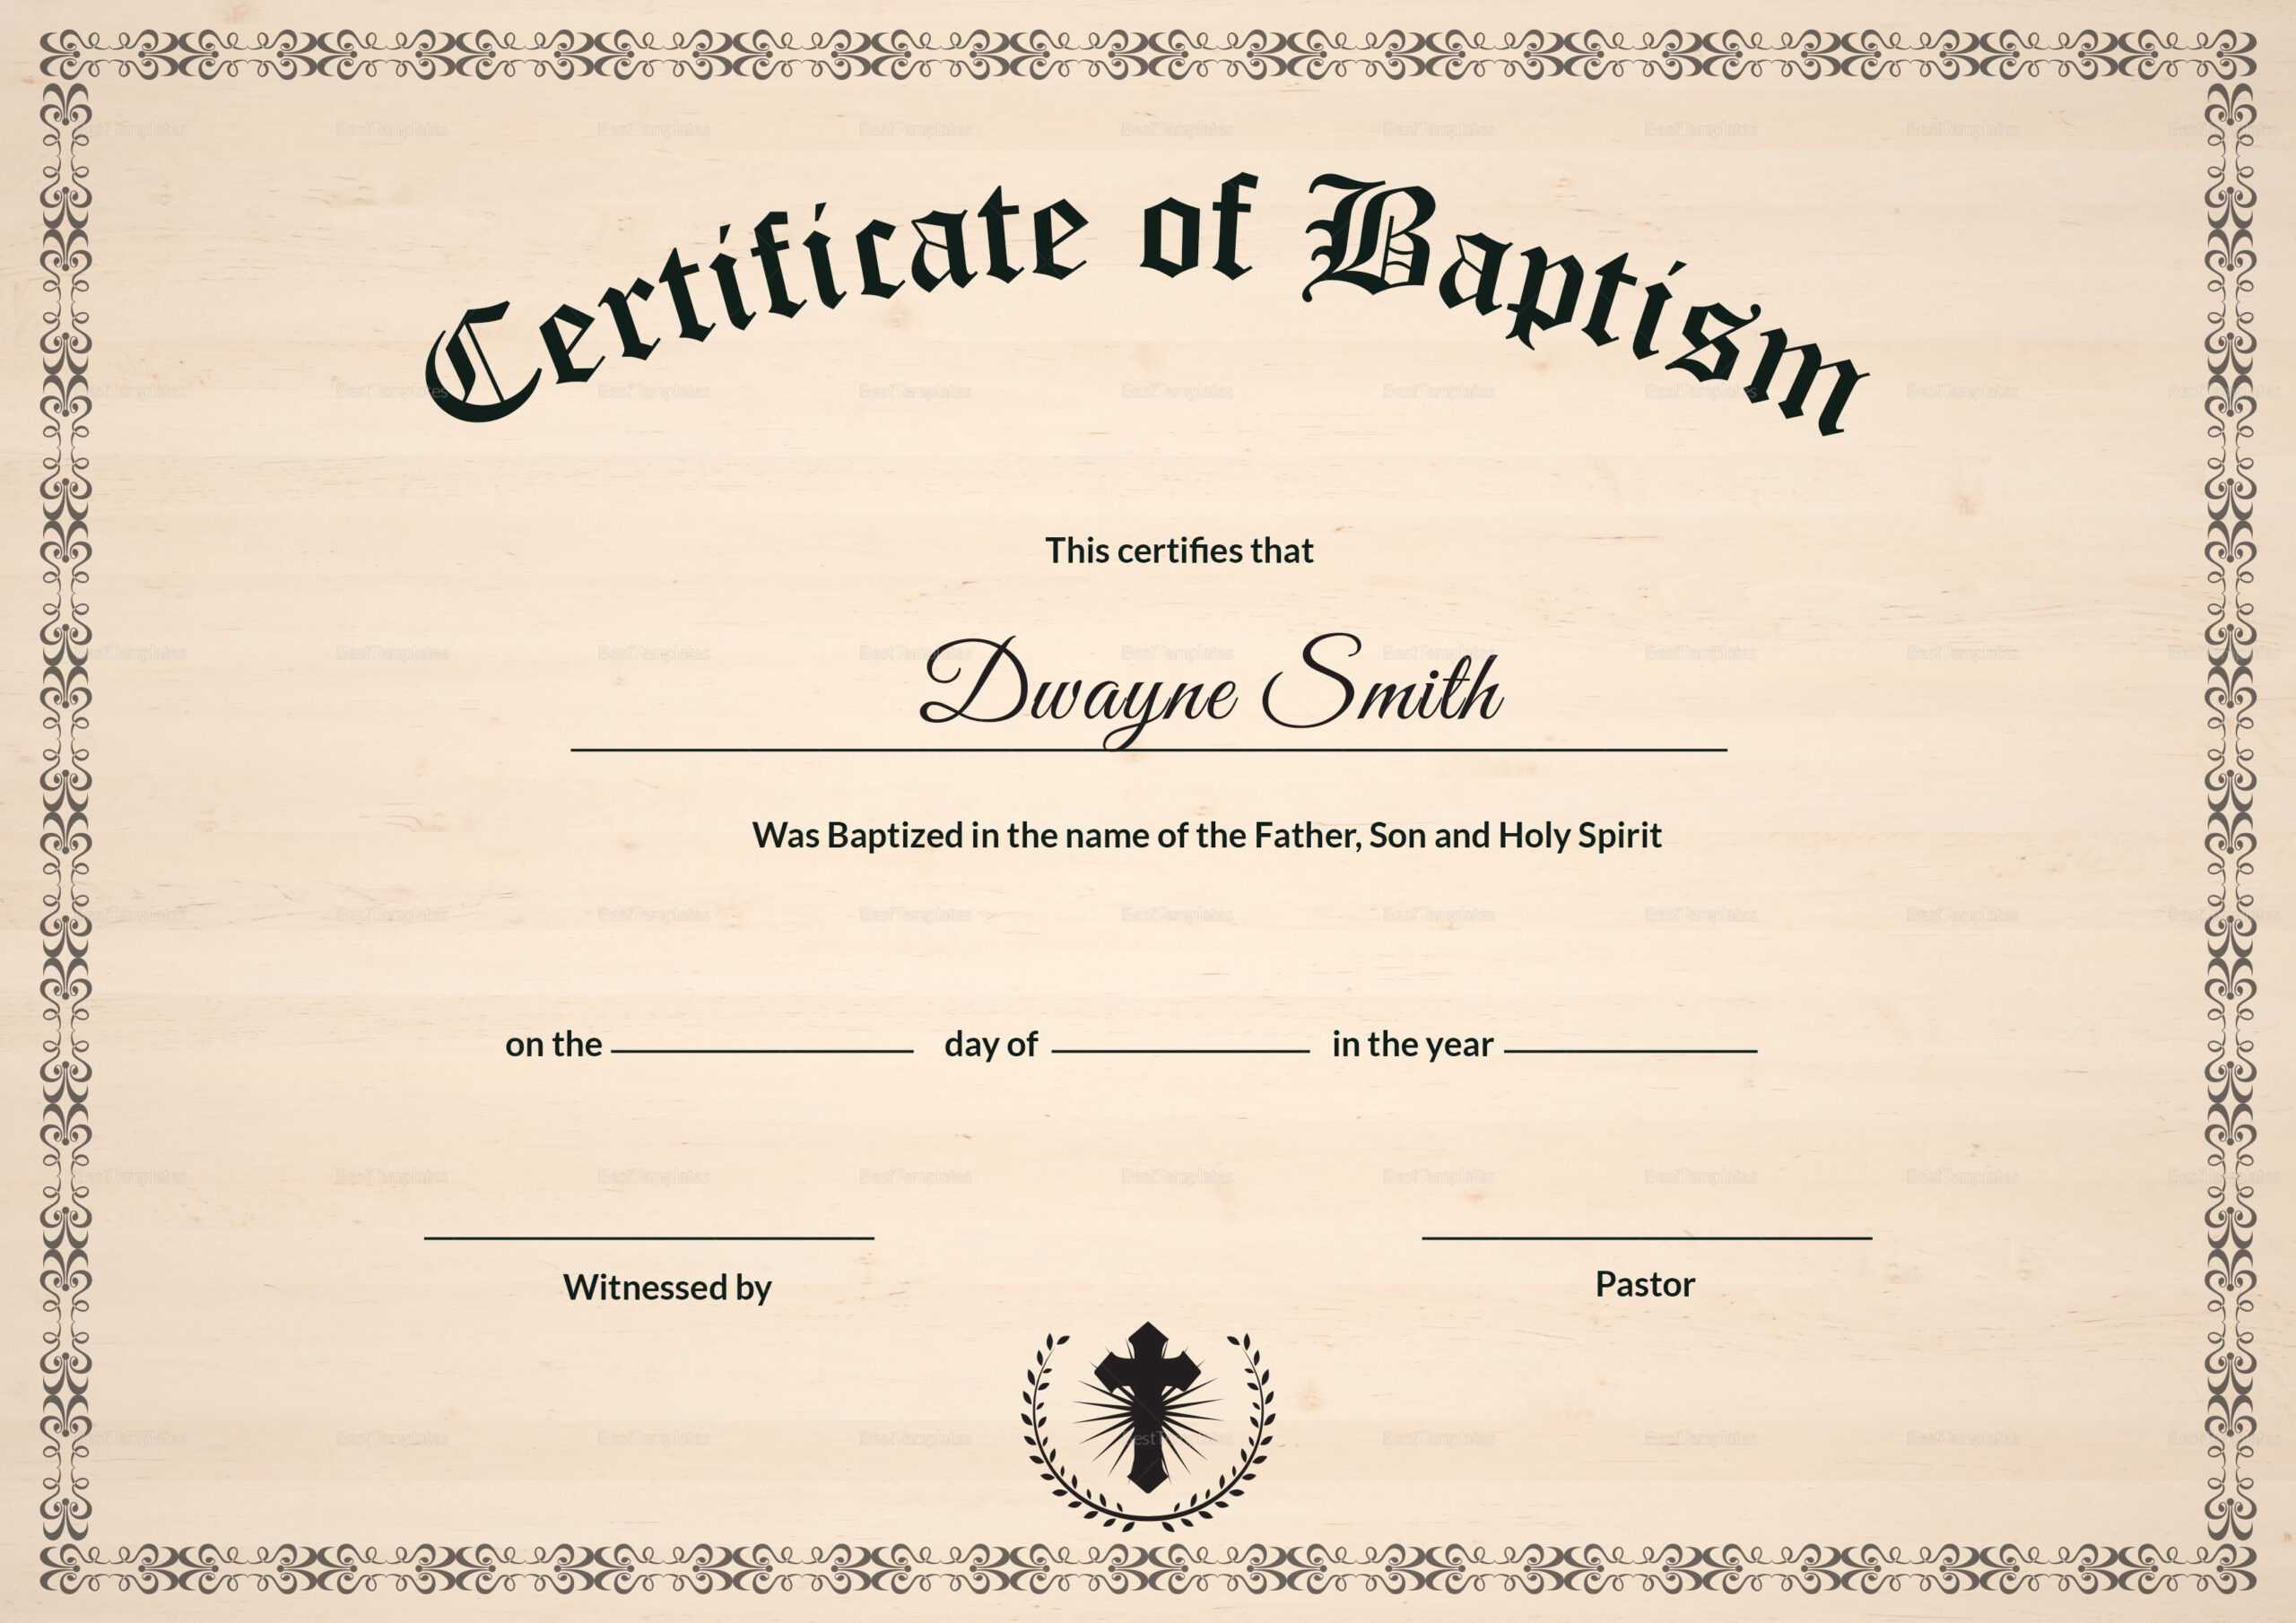 001 Certificate Of Baptism Template Unique Ideas Broadman Throughout Christian Baptism Certificate Template